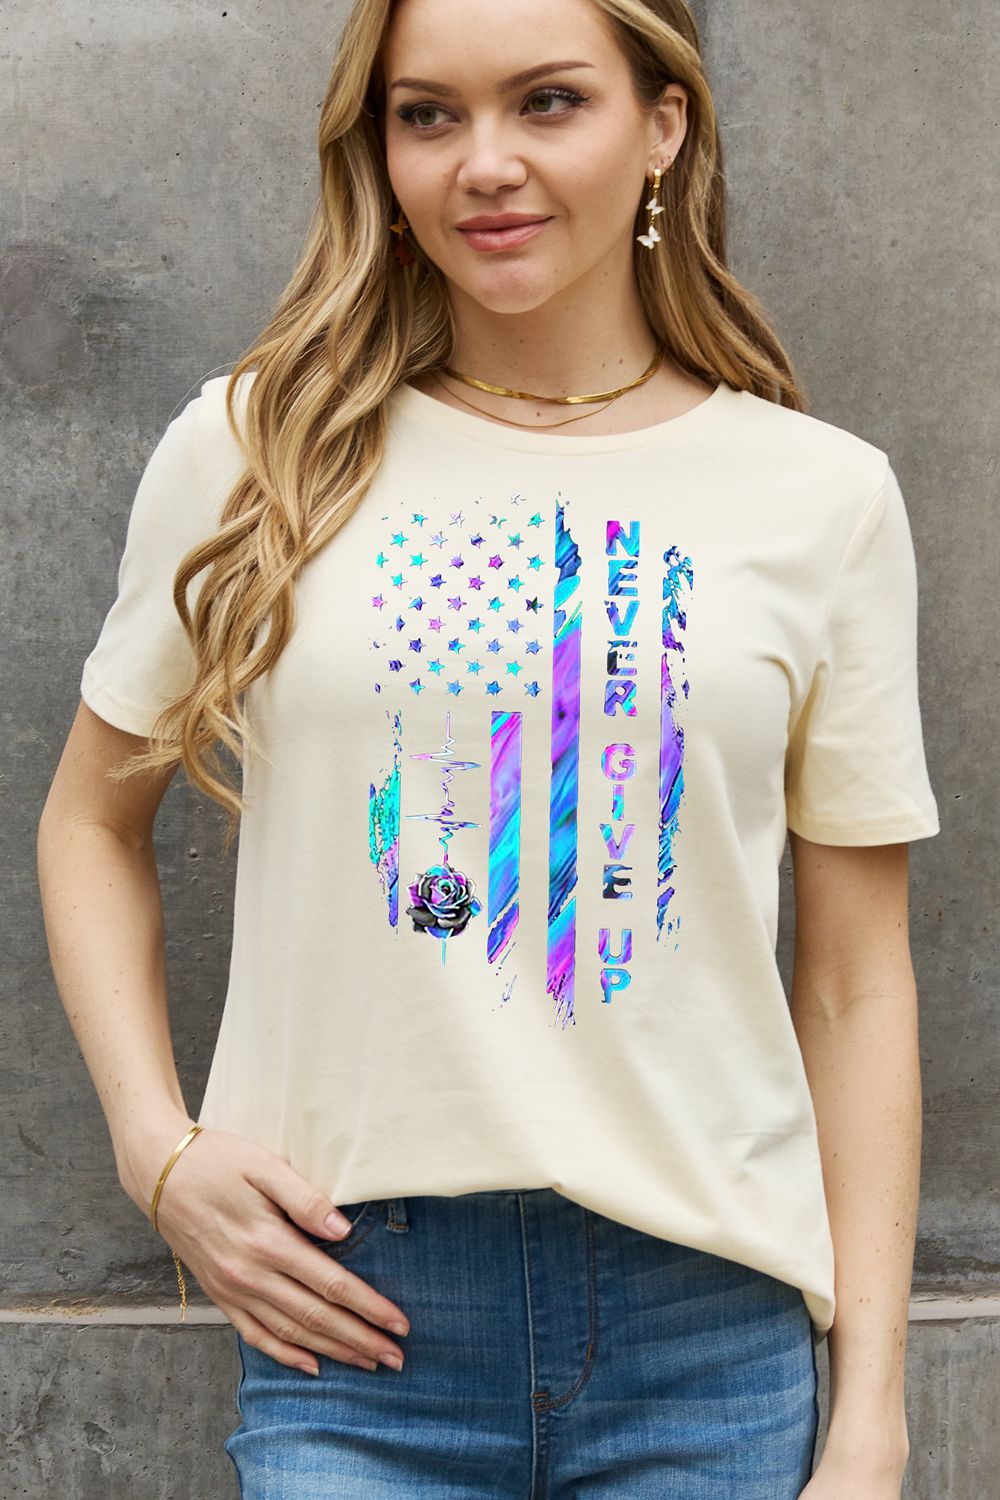 Simply Love NEVER GIVE UP Graphic Cotton Tee